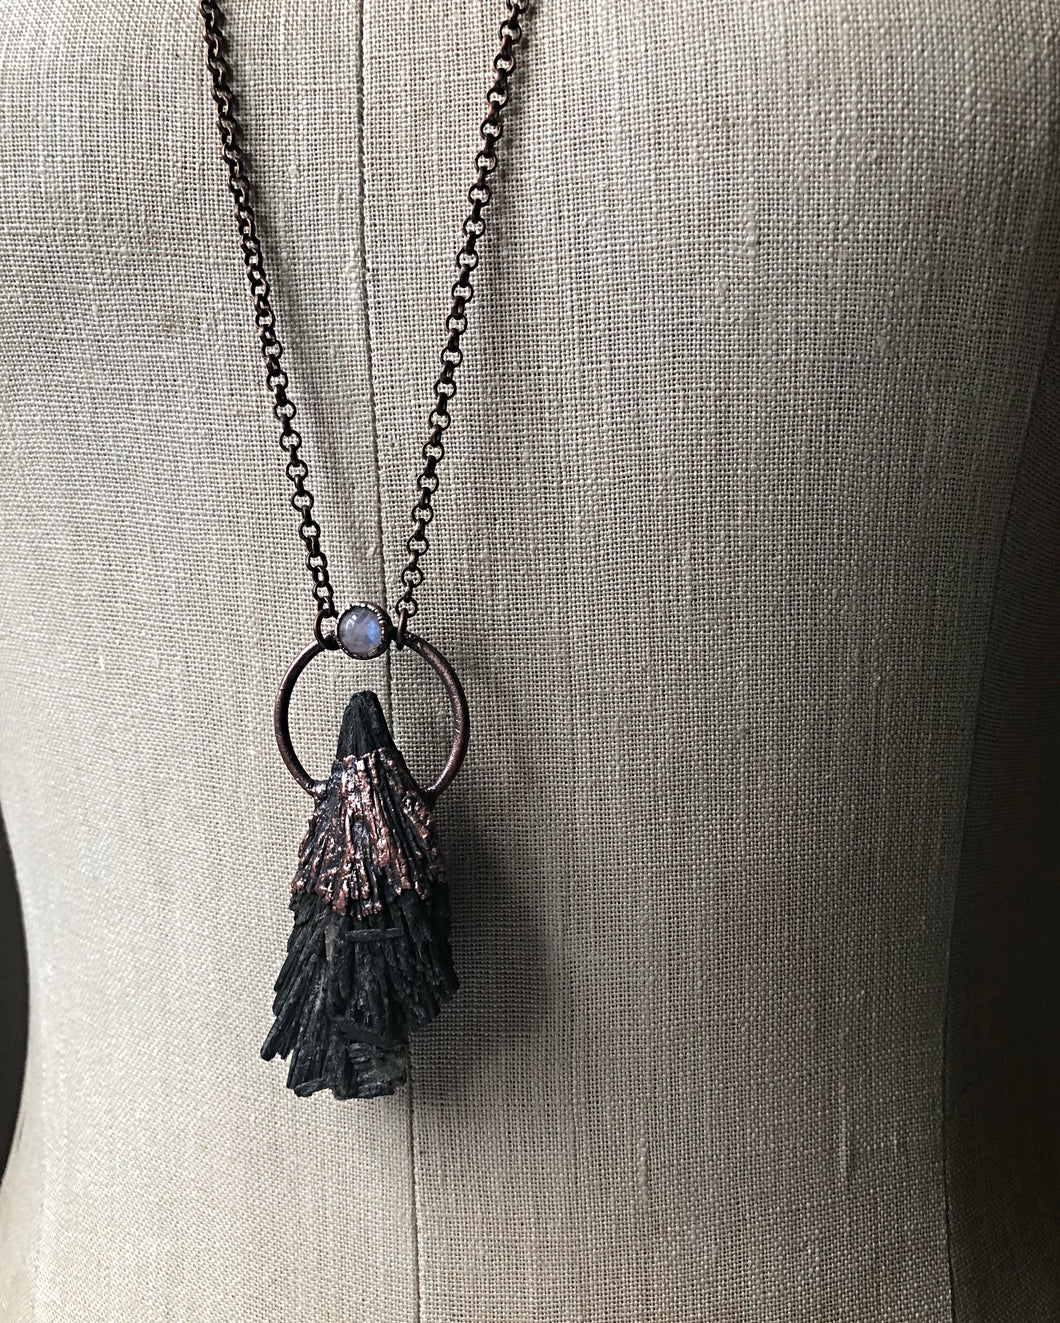 Black Kyanite and Rainbow Moonstone Necklace #1 (Ready to Ship) - Darkness Calling Collection